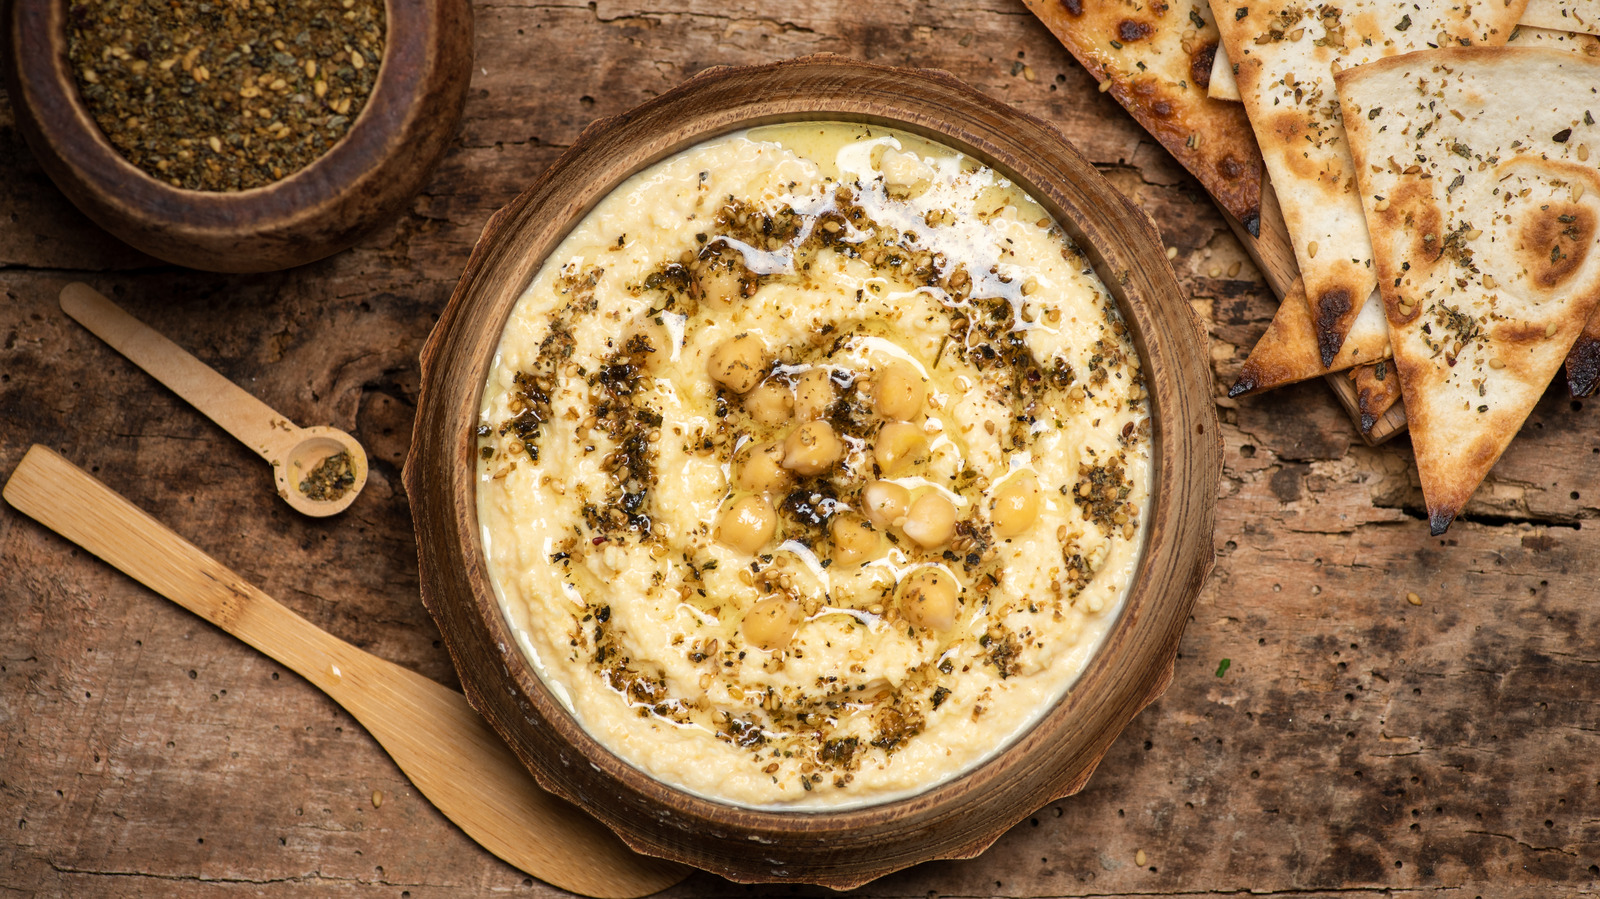 Baking Soda Is Key To Making Hummus From Canned Chickpeas Creamier